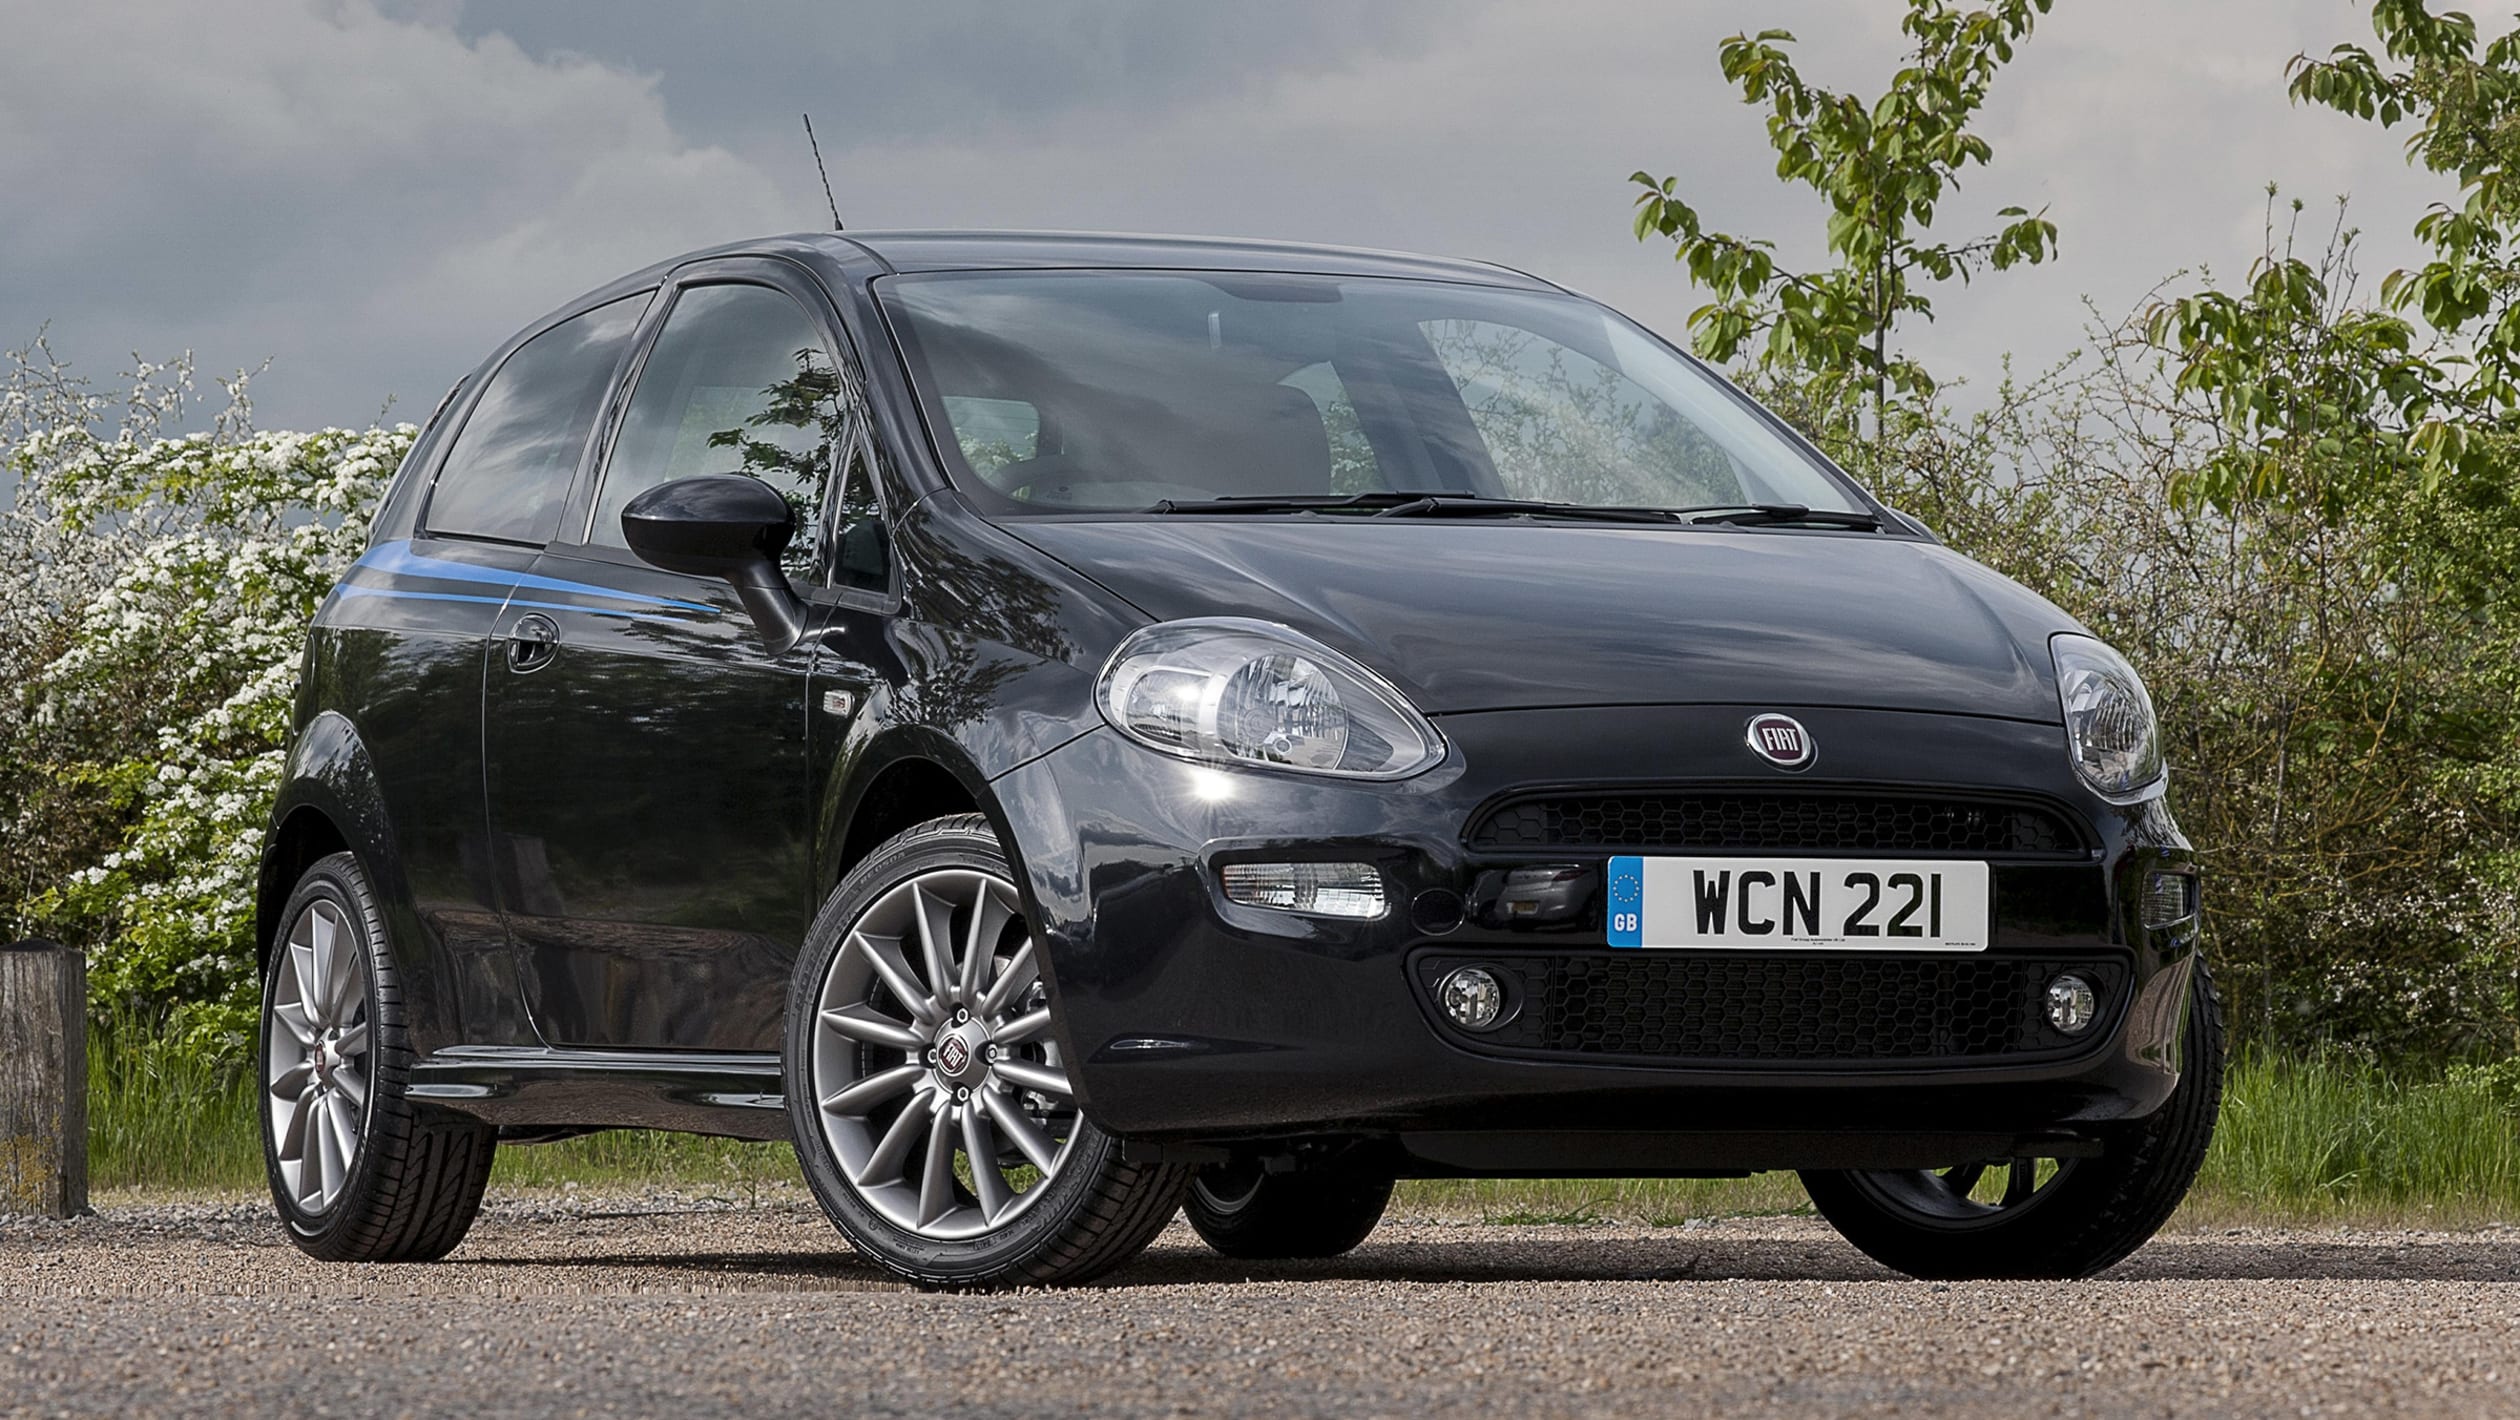 Used Fiat Grande Punto review pictures Auto Express